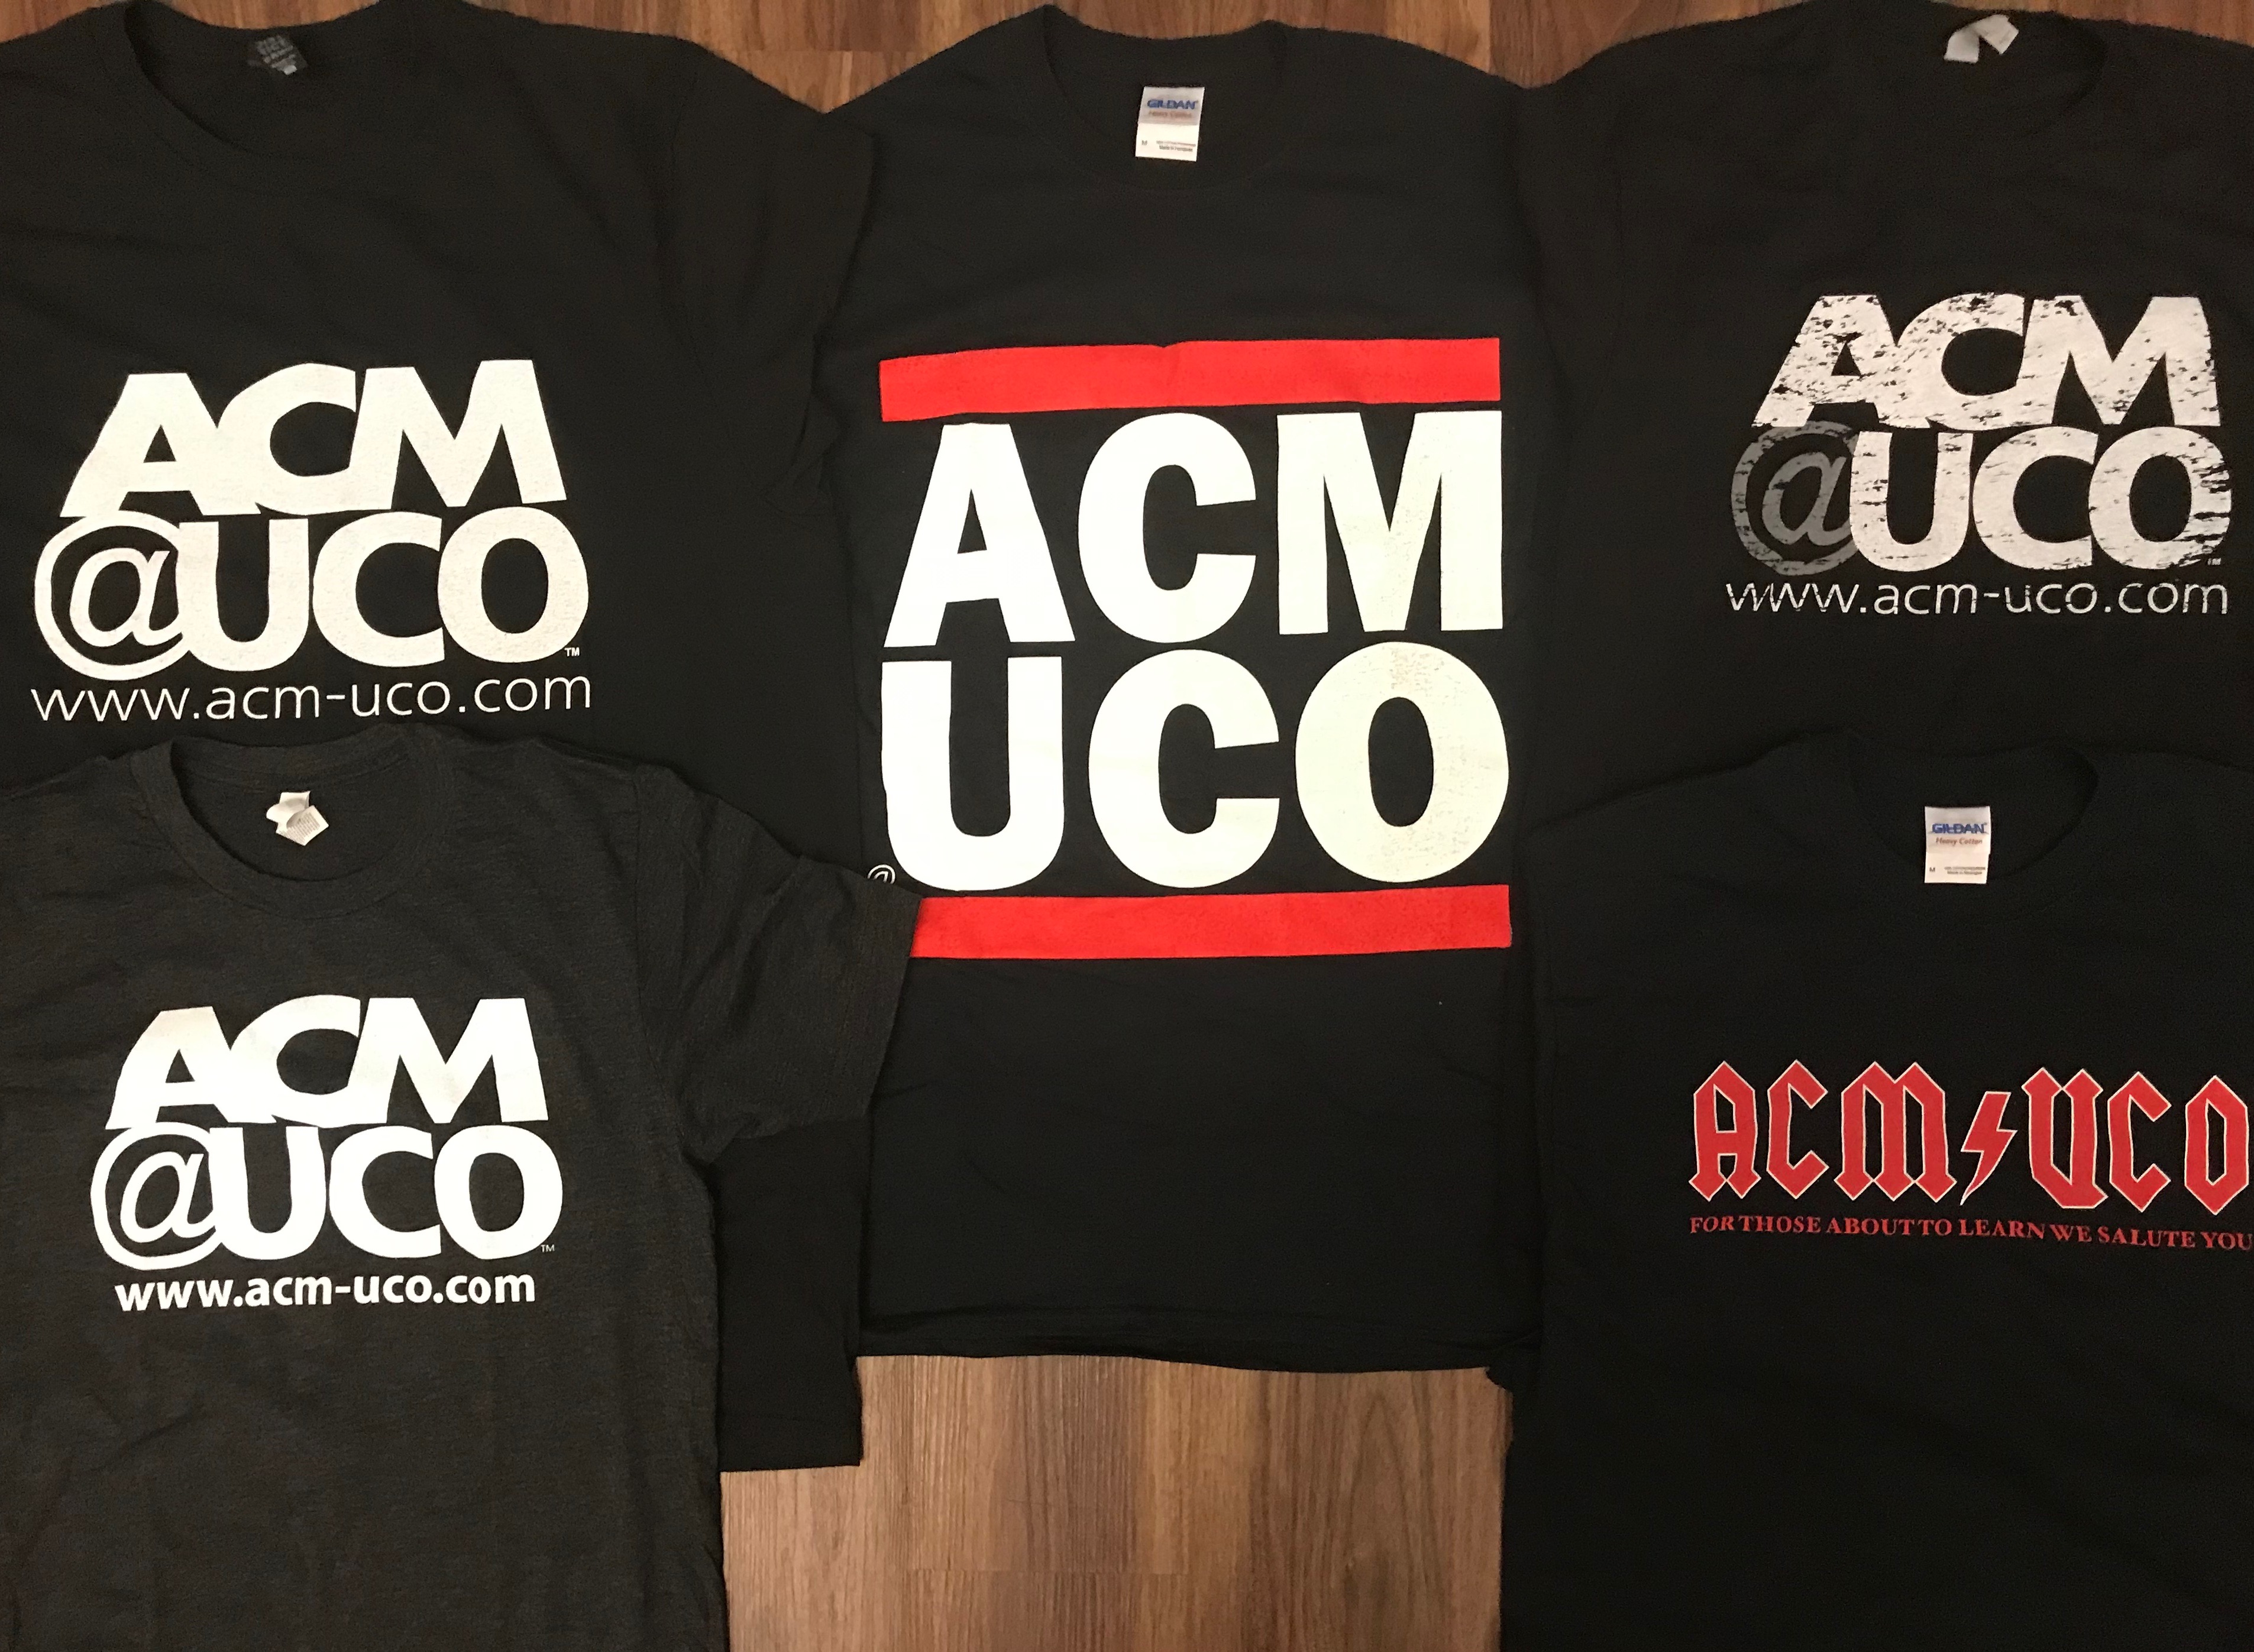 ***CLOSEOUT INVENTORY*** ACM@UCO T-Shirt - $10.00 *********ACM@UCO PICKUP ONLY, NO SHIPPING*********